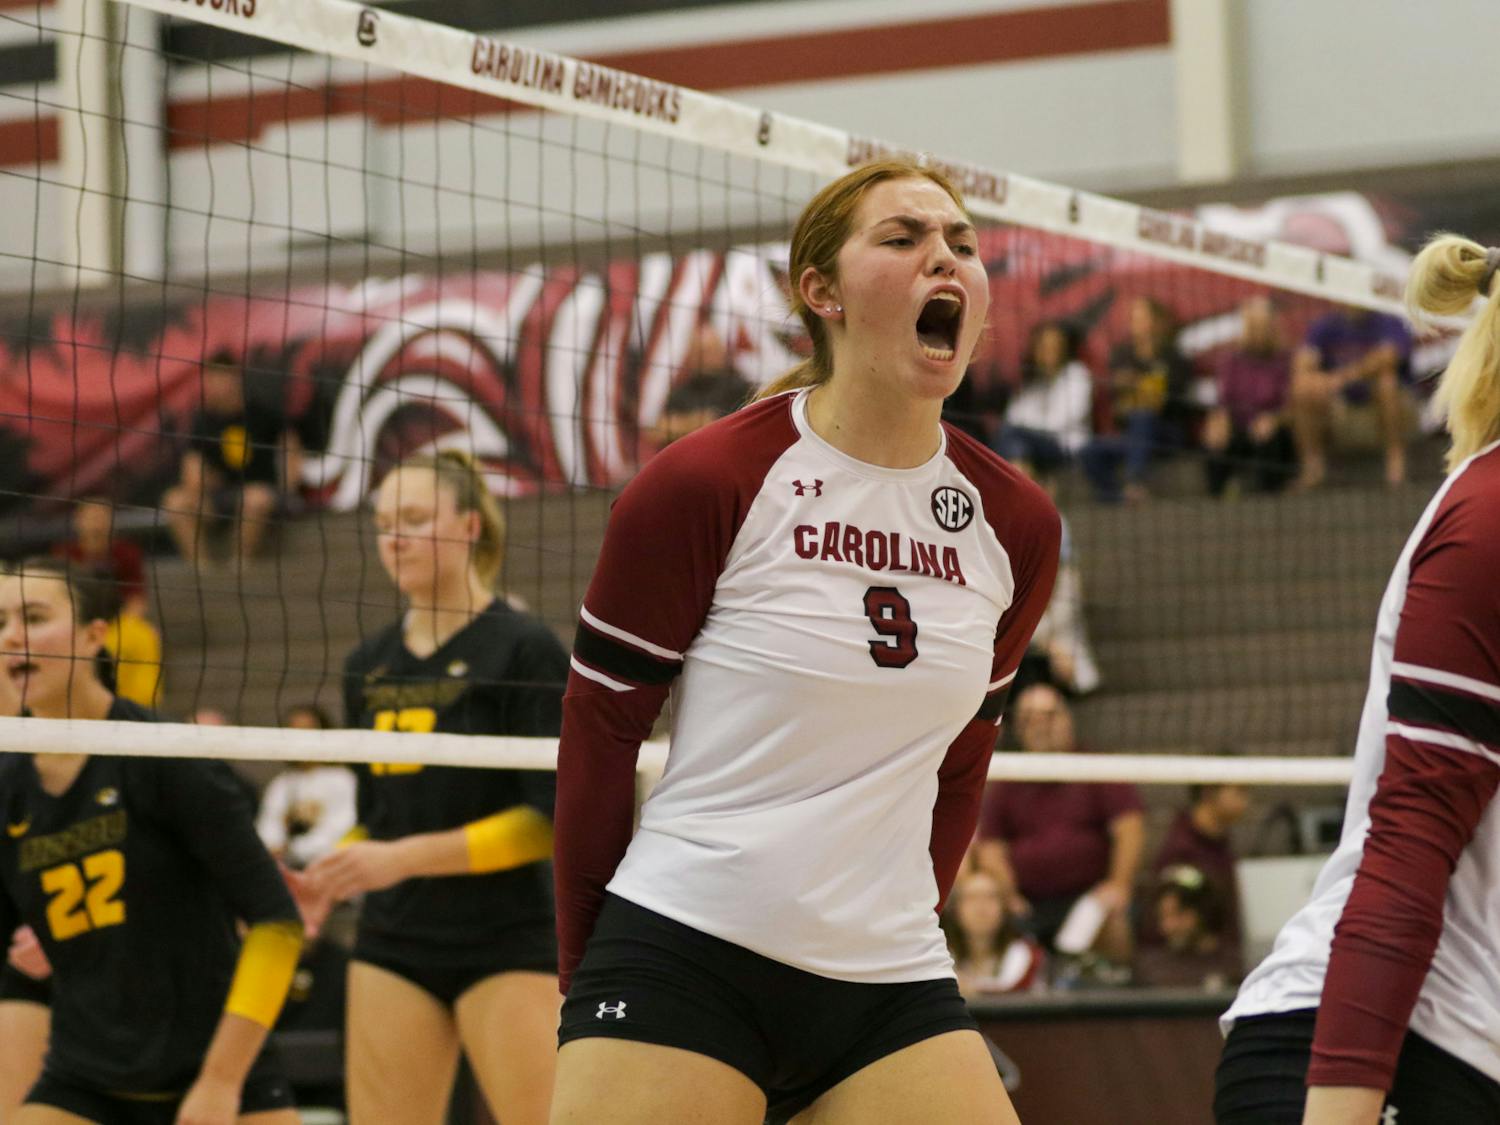 Junior middle Ellie Ruprich celebrating a point at South Carolina’s game against Mizzou on Oct. 1, 2022.&nbsp;Strong defensive play earned the South Carolina volleyball team two victories over conference opponent Missouri this weekend.&nbsp;